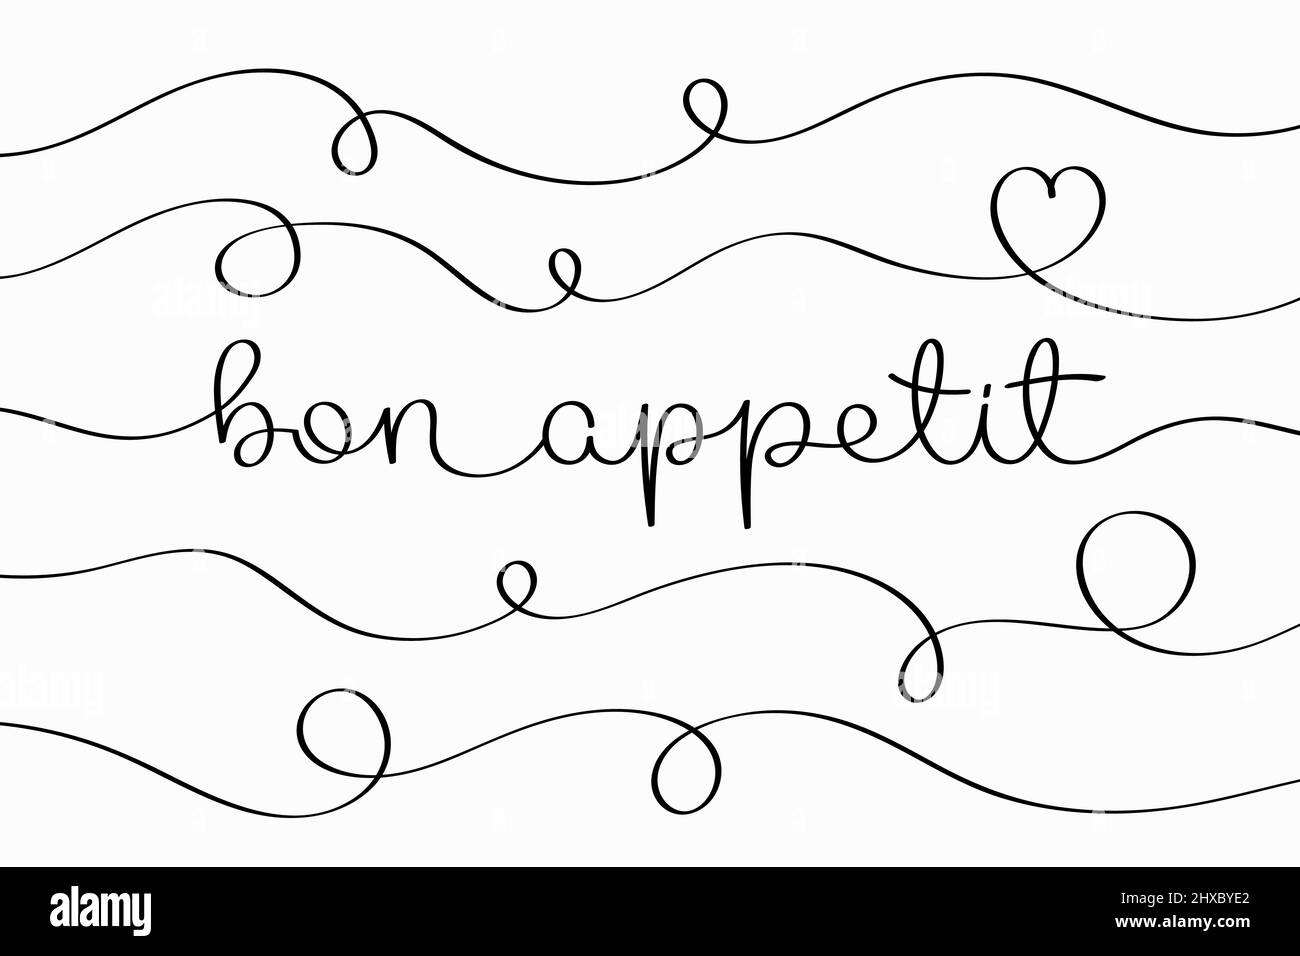 Bon Appetit lettering. Vector illustration of creative typography with continuous one line hand drawn text isolated on white background Stock Vector